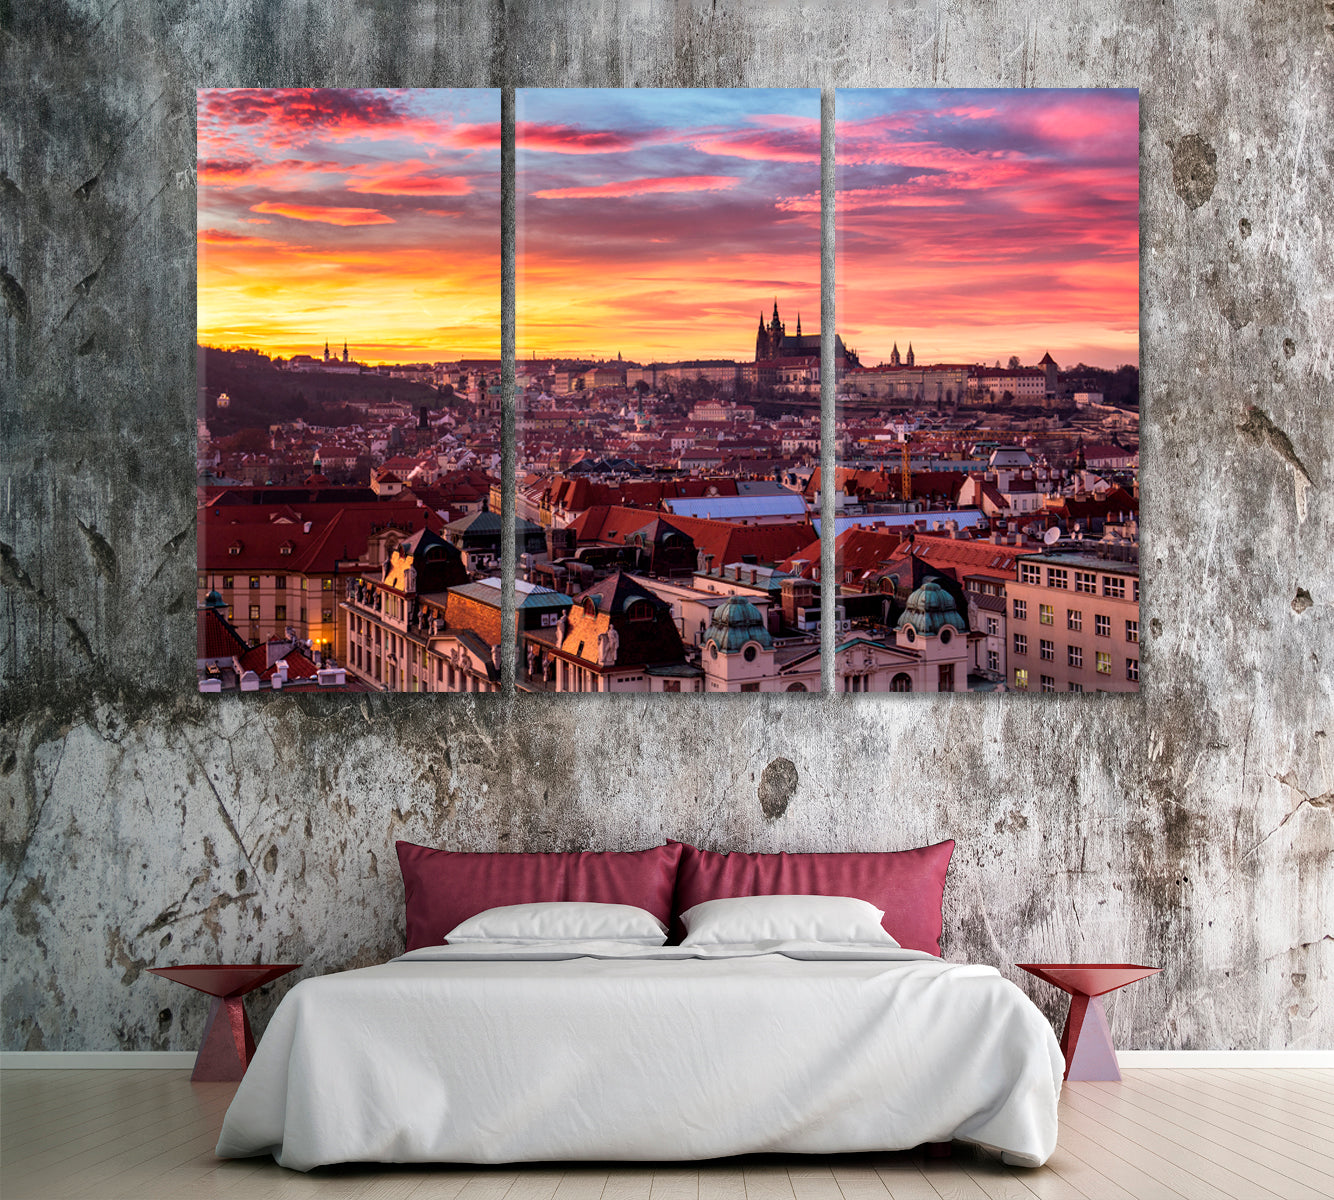 Old Town Square Prague Canvas Print ArtLexy 3 Panels 36"x24" inches 